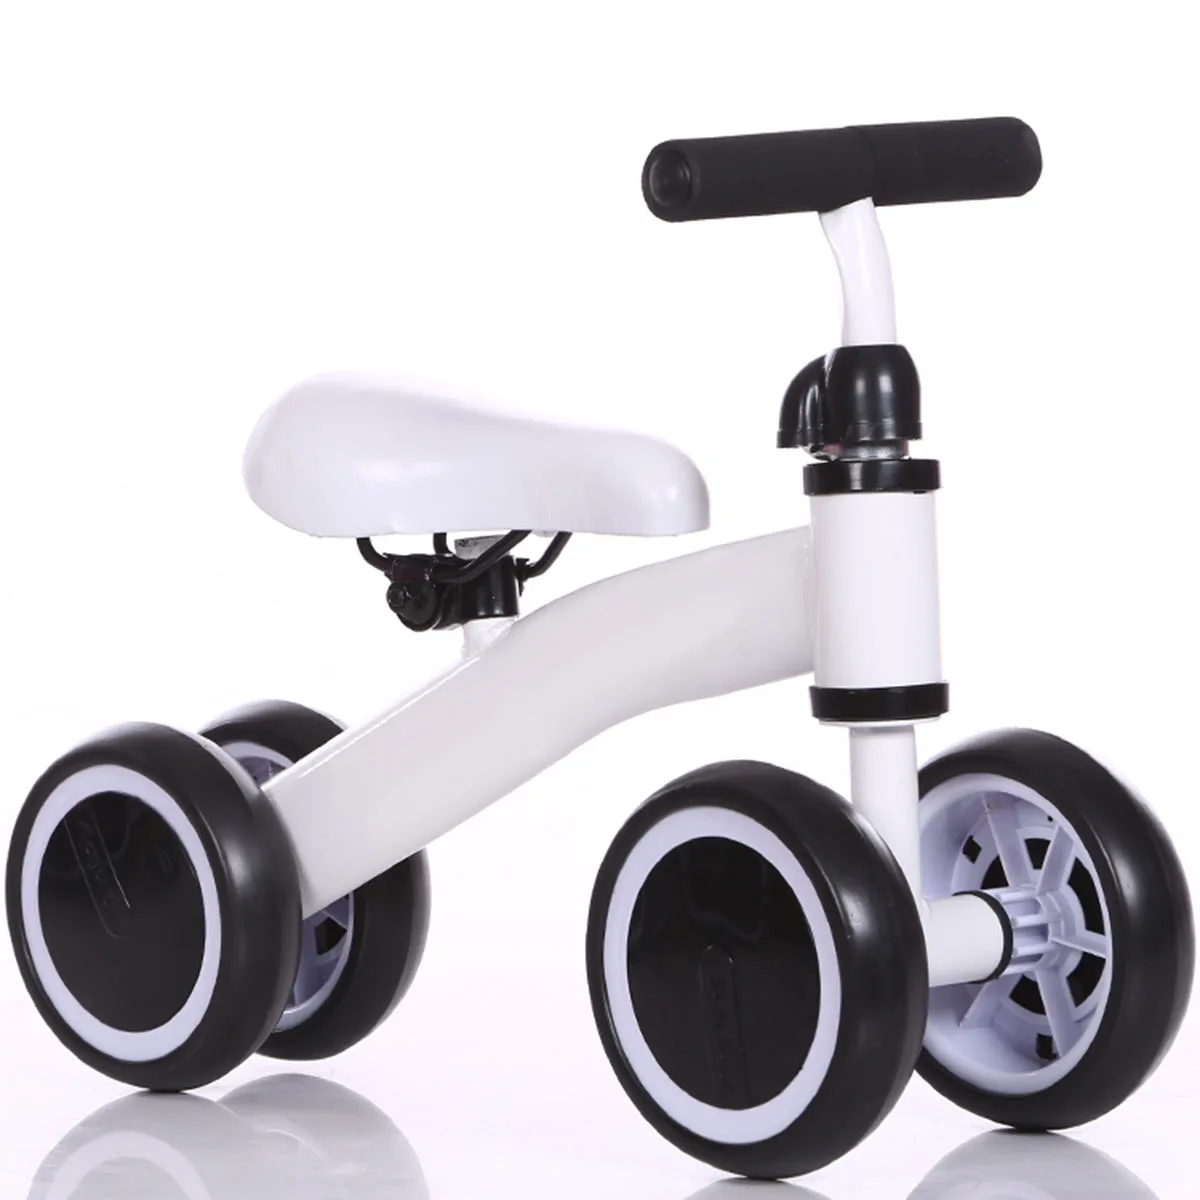 Baby Balance Bike Learn To Walk Get Balance Sense No Foot Pedal Riding Toys for Kids Baby Toddler 1-3 years Child Tricycle Bike